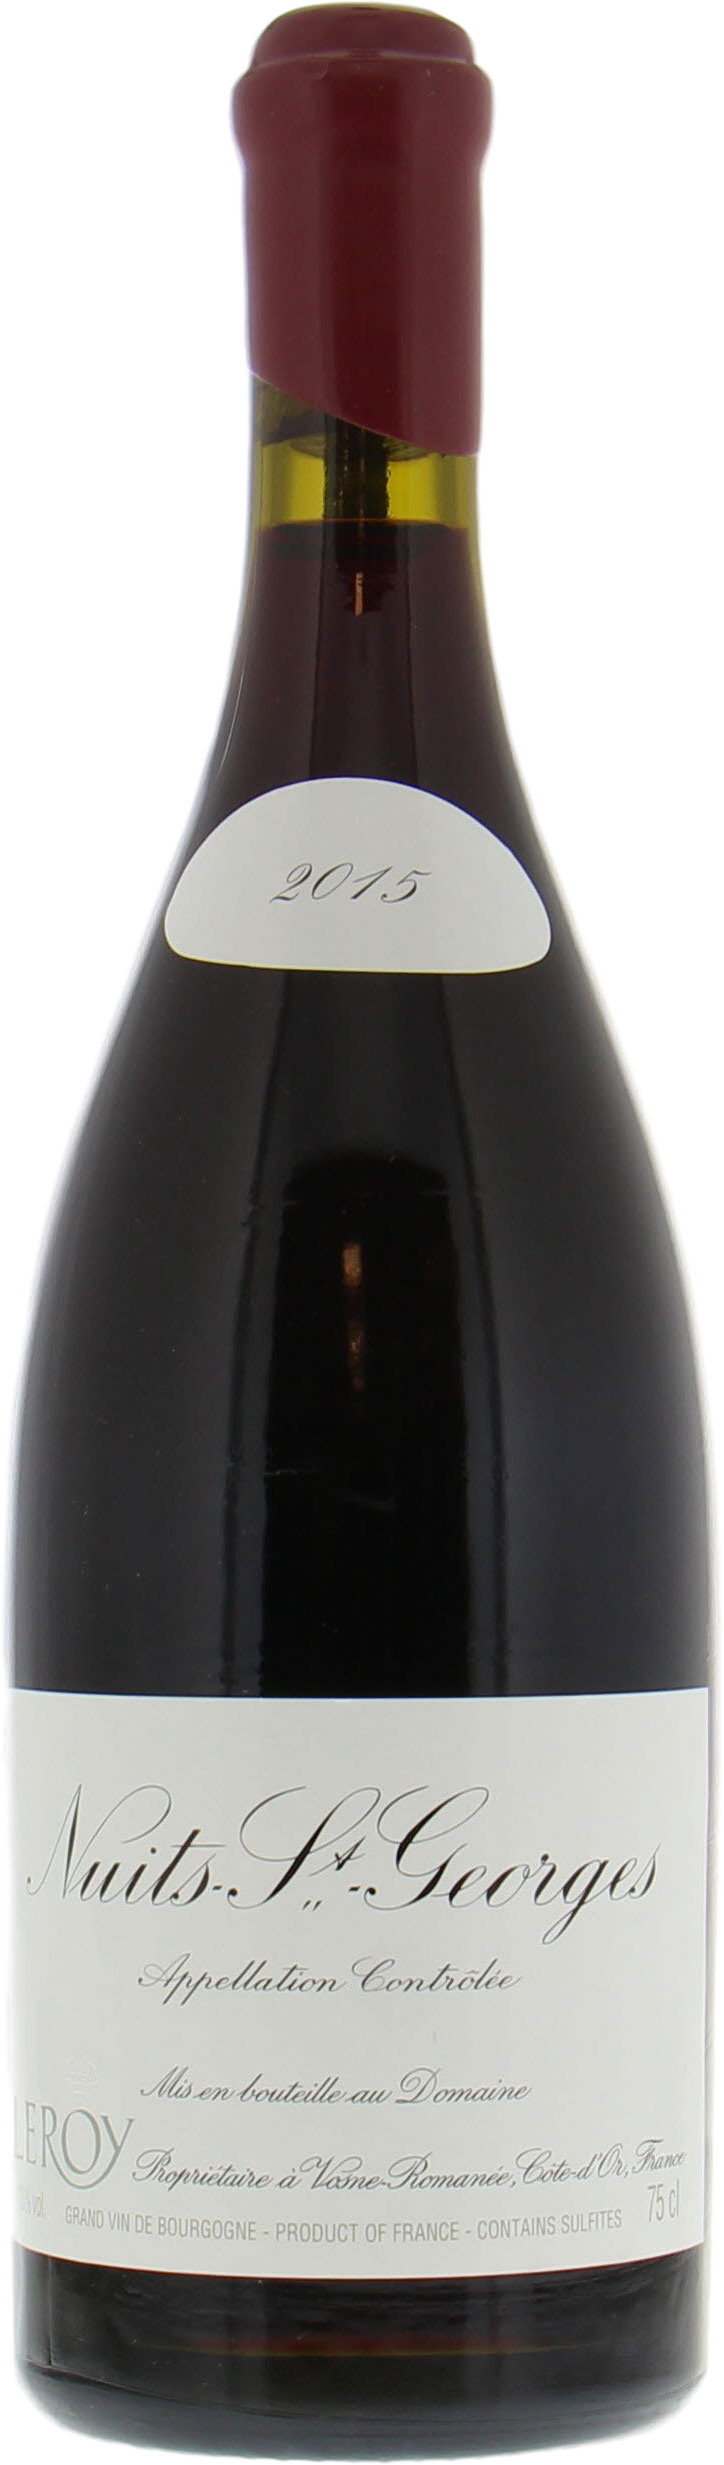 Domaine Leroy - Nuits St. Georges 2015